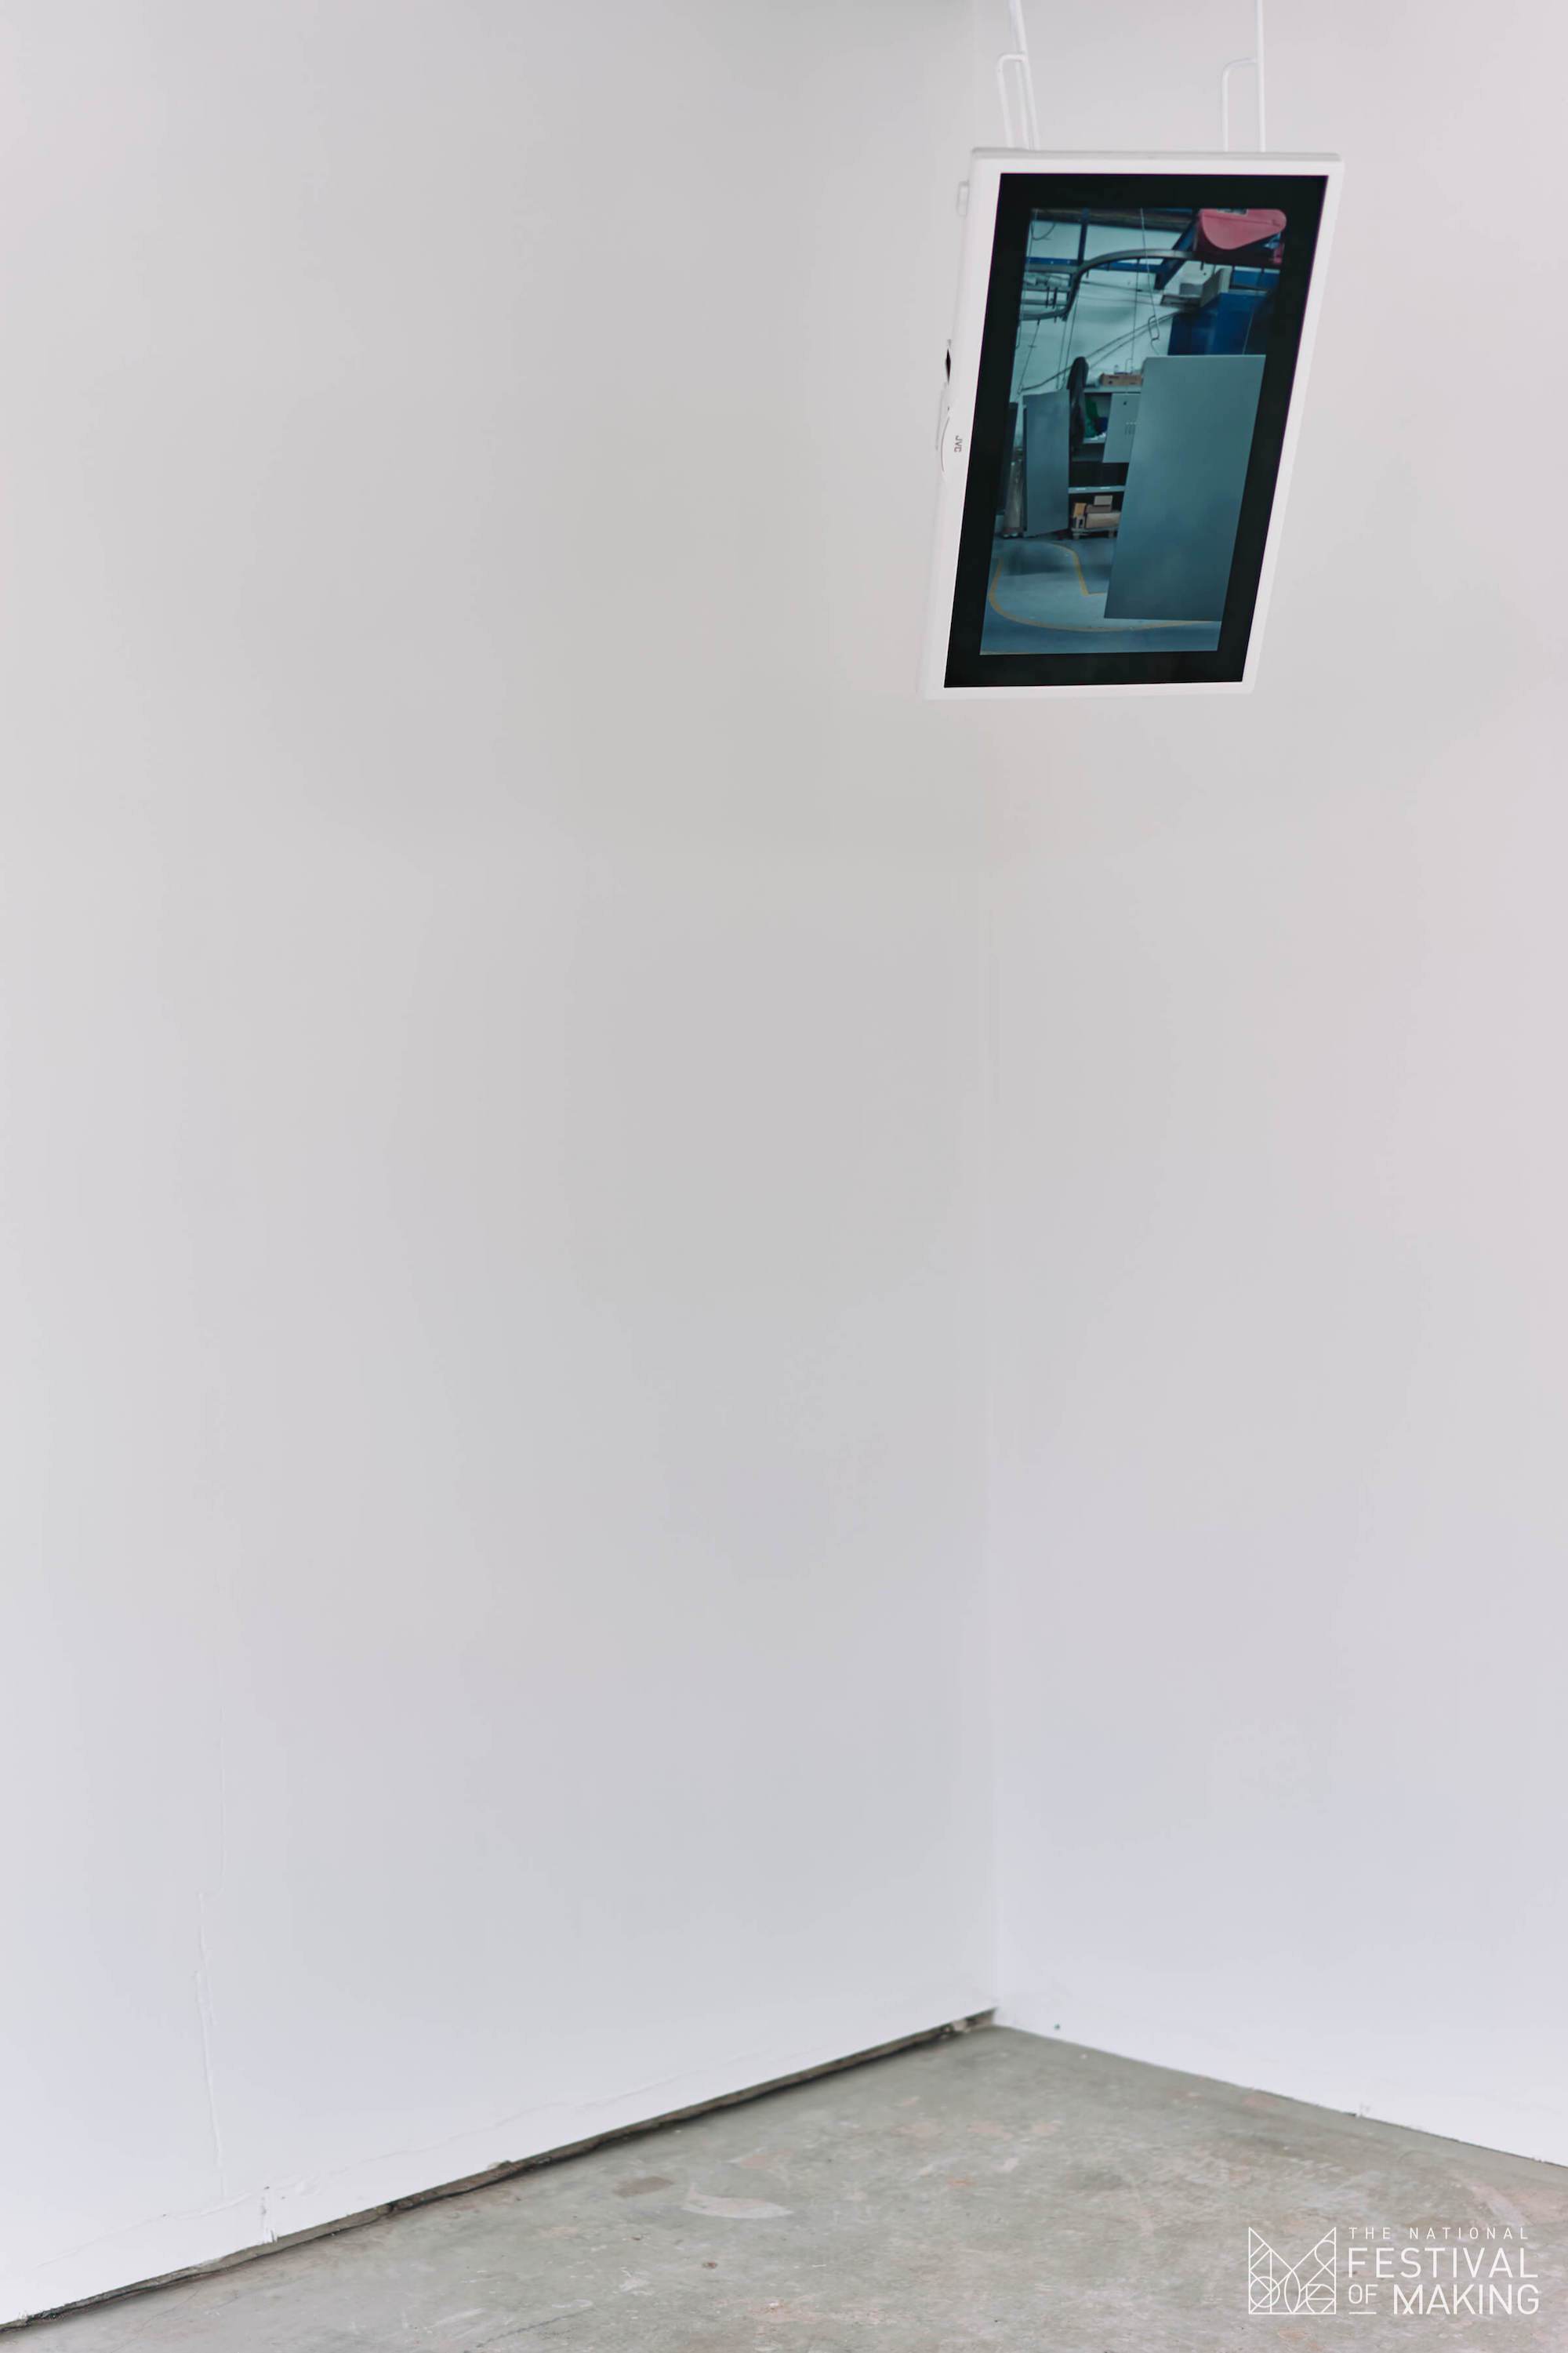 Film footage showing freshly powder coated panels suspended by hooks on the paint line. The installation suspends the video on a flat panel tv by the same hooks. Images courtesy of GS Visuals and The National Festival of Making 